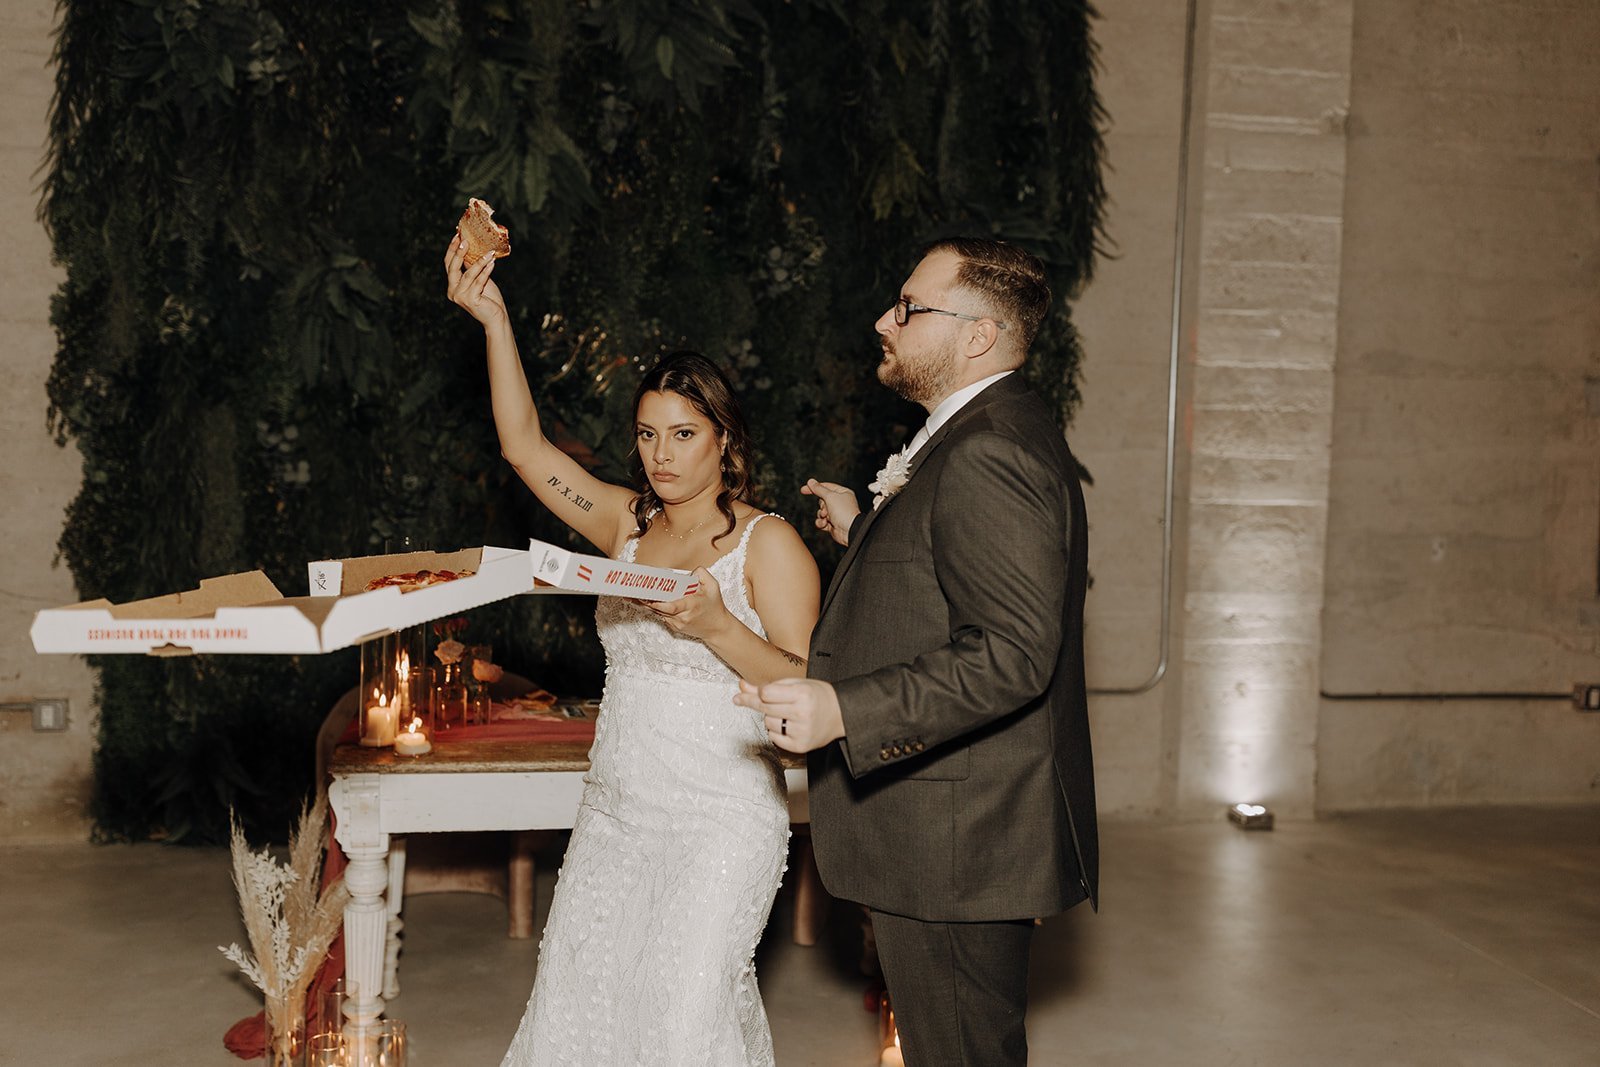 Bride and groom celebrate while holding pizza box at Austin, Texas wedding reception